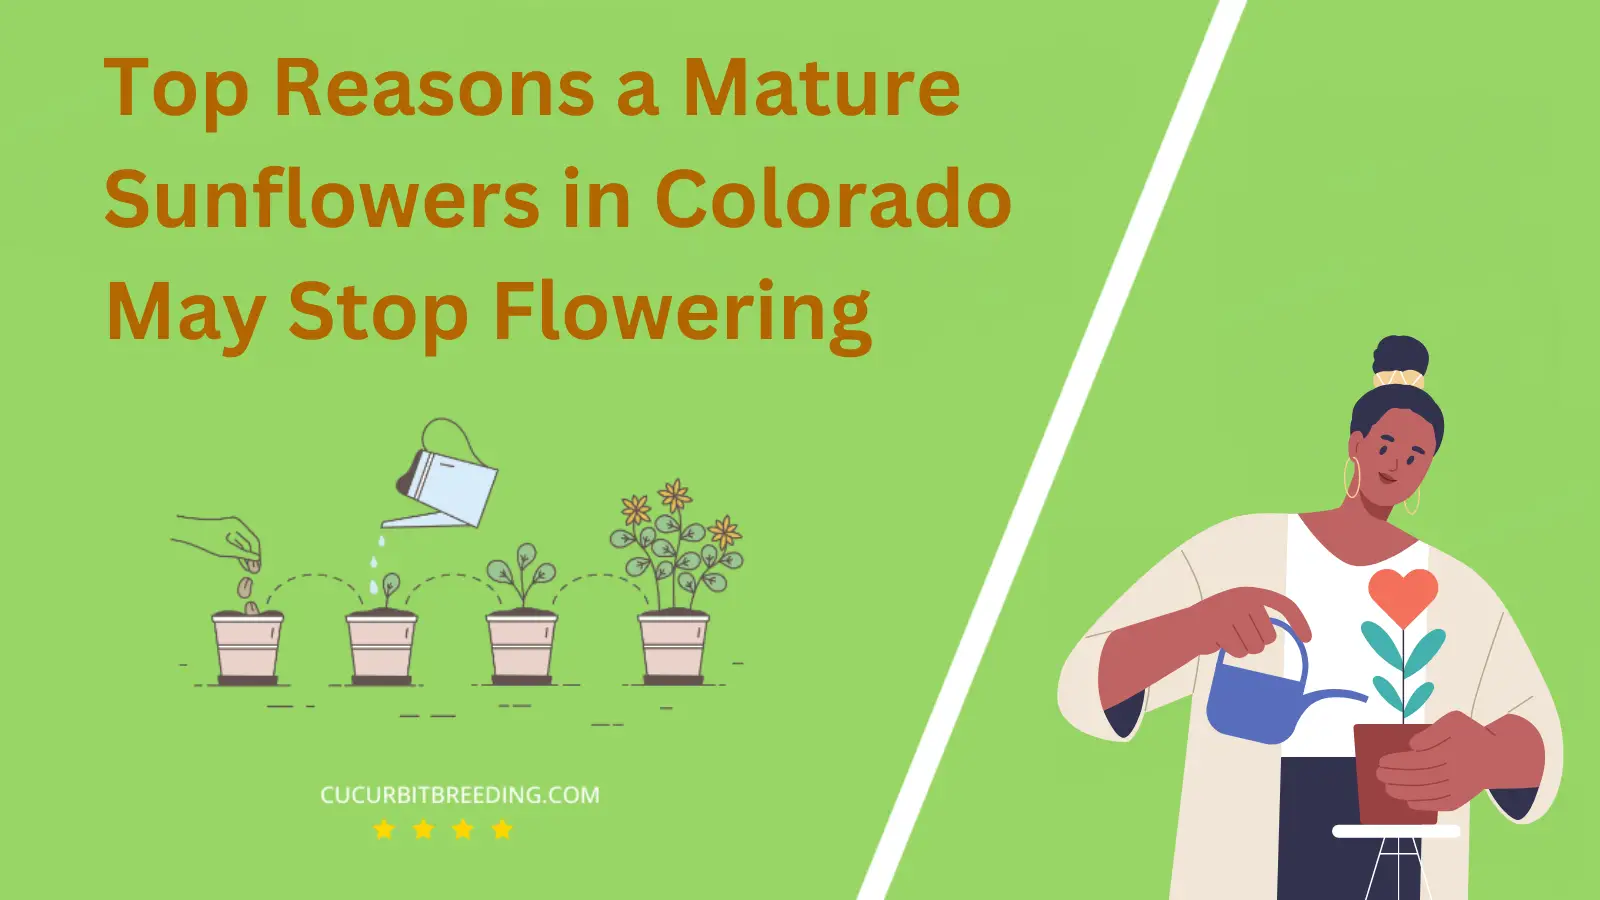 Top Reasons a Mature Sunflowers in Colorado May Stop Flowering